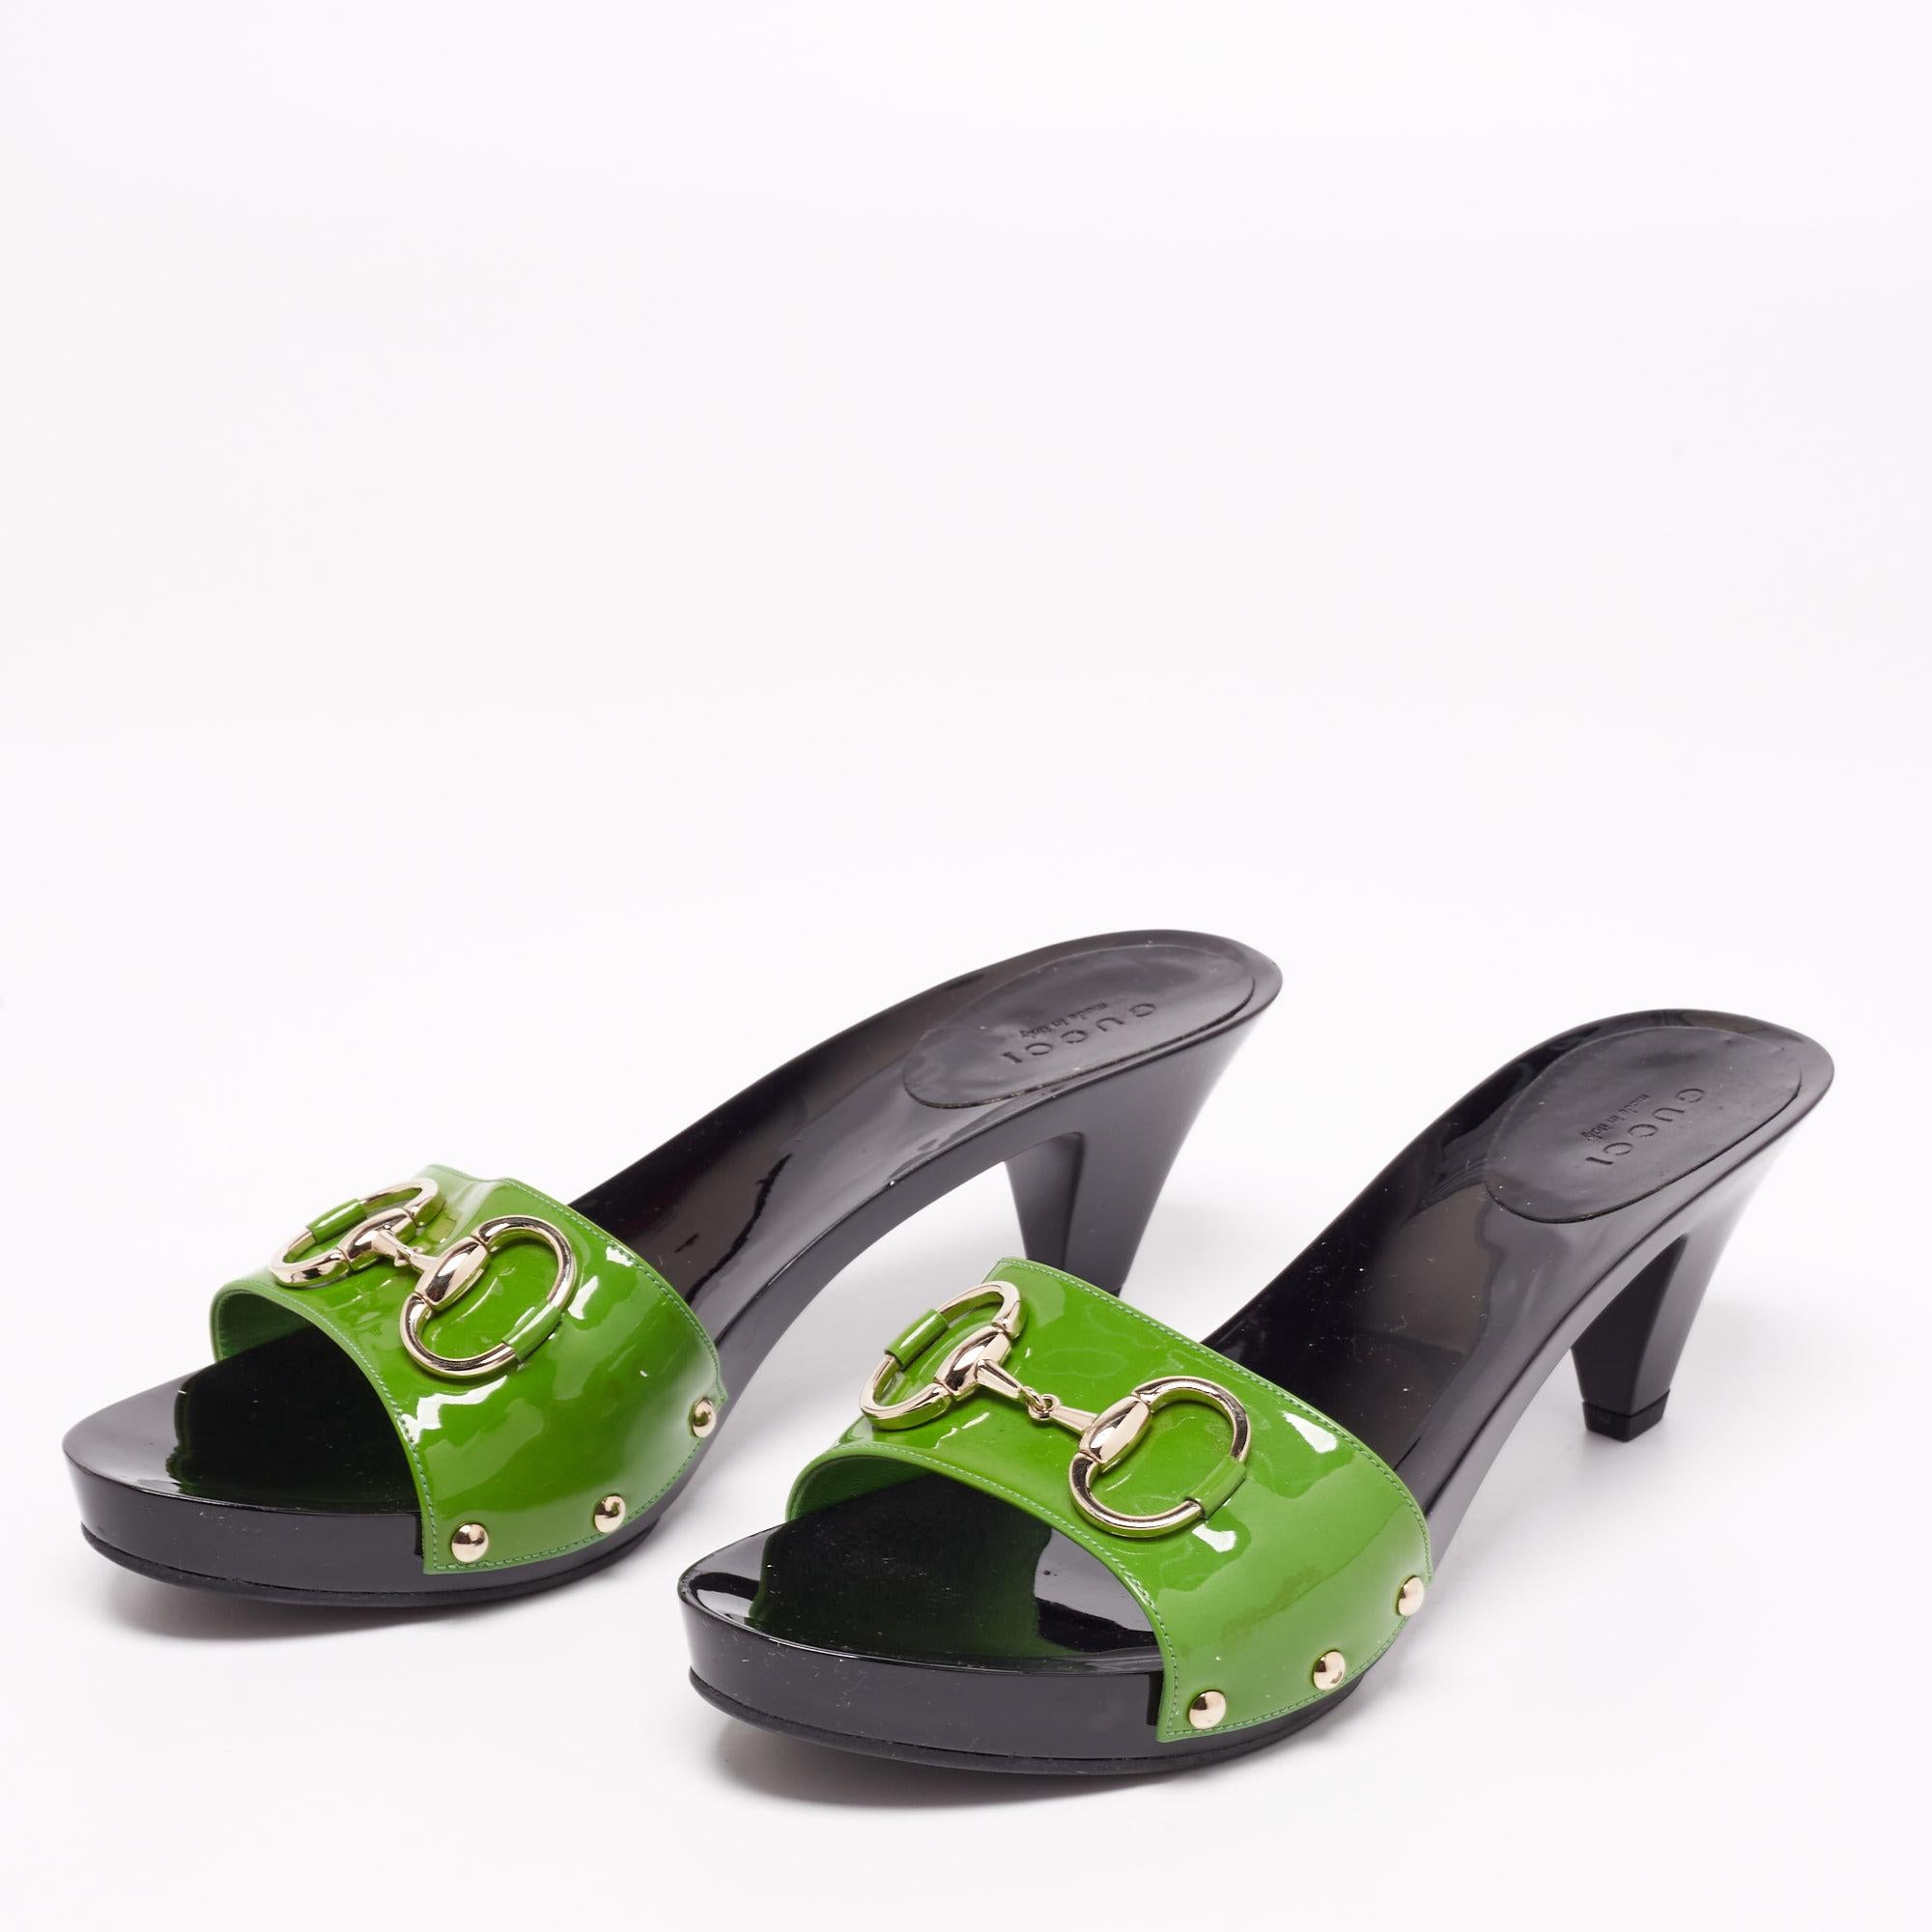 
These Gucci slide sandals are crafted from patent leather into an open-toe silhouette. They are embellished with the signature Horsebit and elevated on 7 cm heels.

Includes: Brand Box, Info Booklet, Original Dustbag